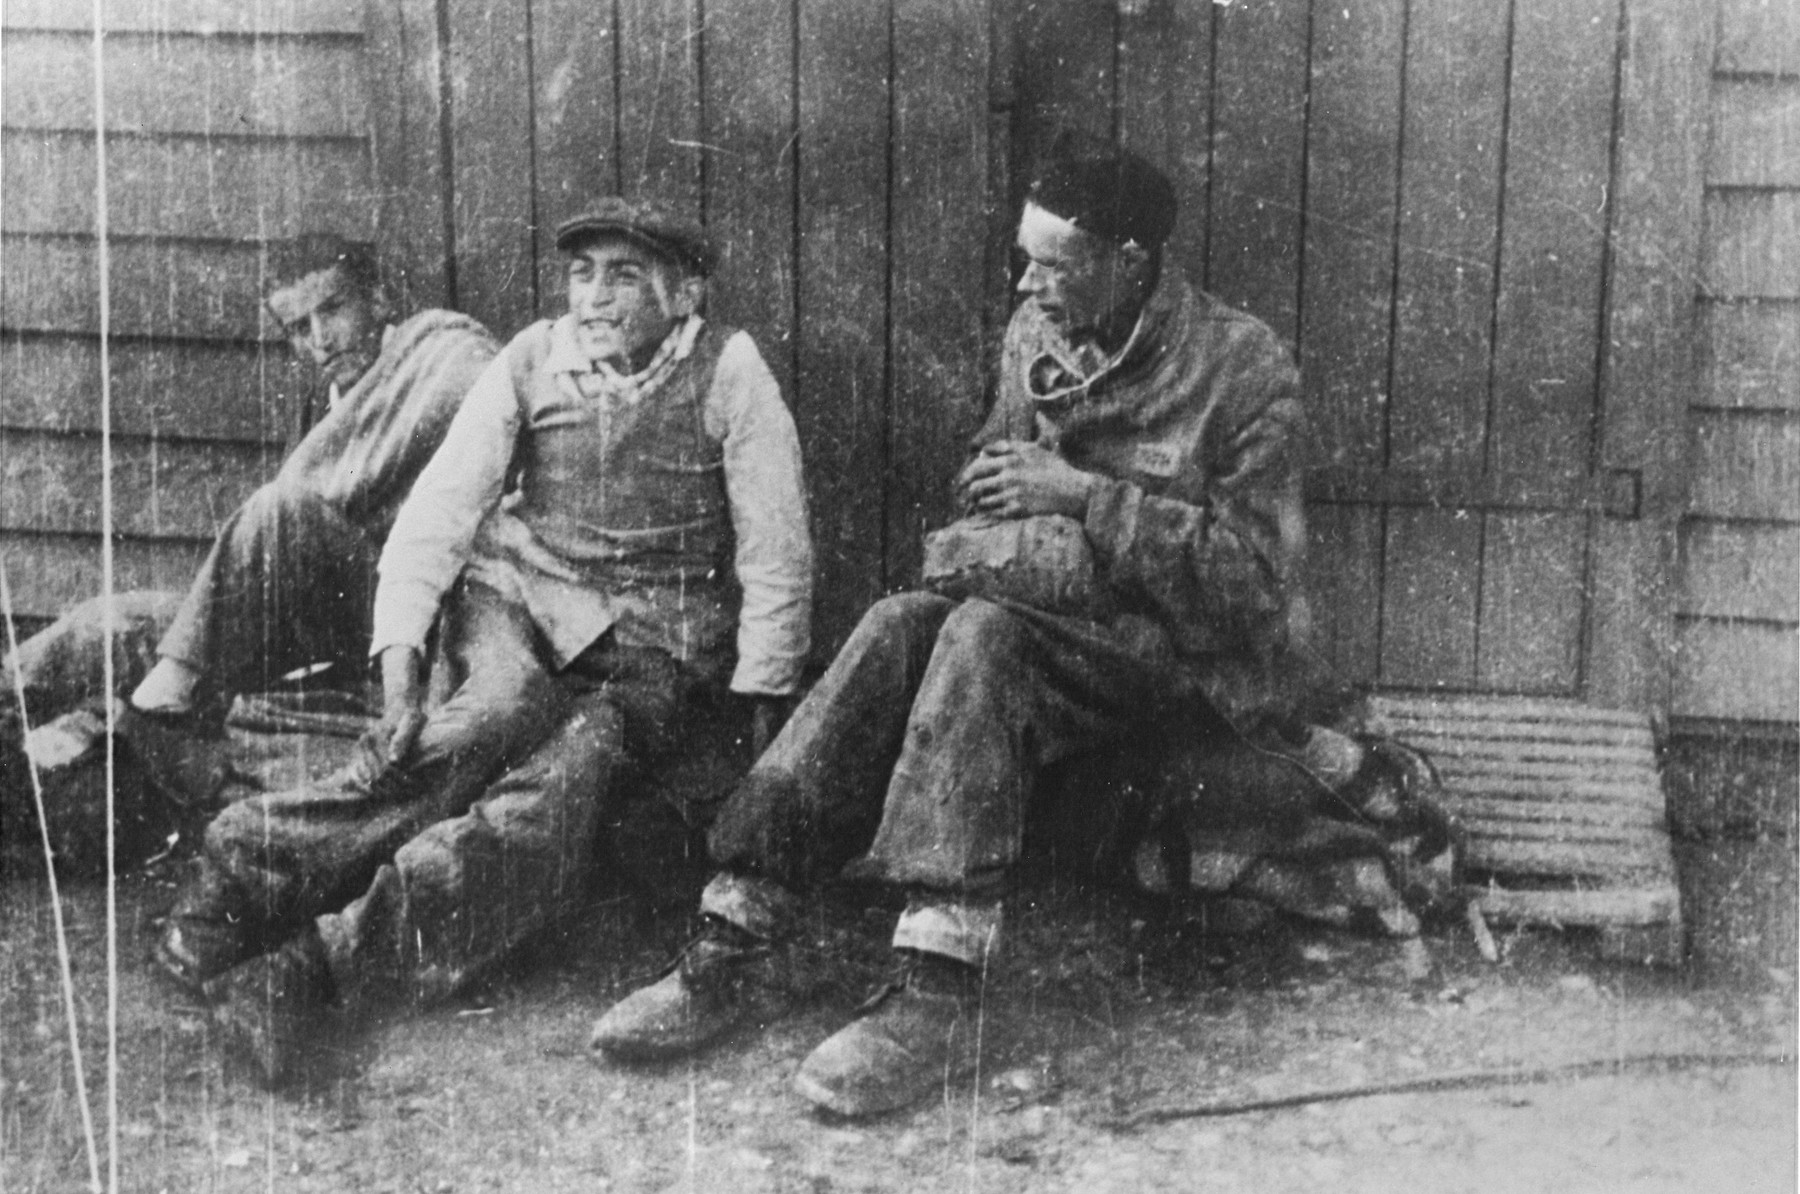 Three survivors sit outside a barracks in the newly liberated Hurlach concentration camp.

These men survived by hiding under a brick building when SS guards razed several barracks in the camp.  Only twelve survivors were found in Hurlach at the time of its liberation.